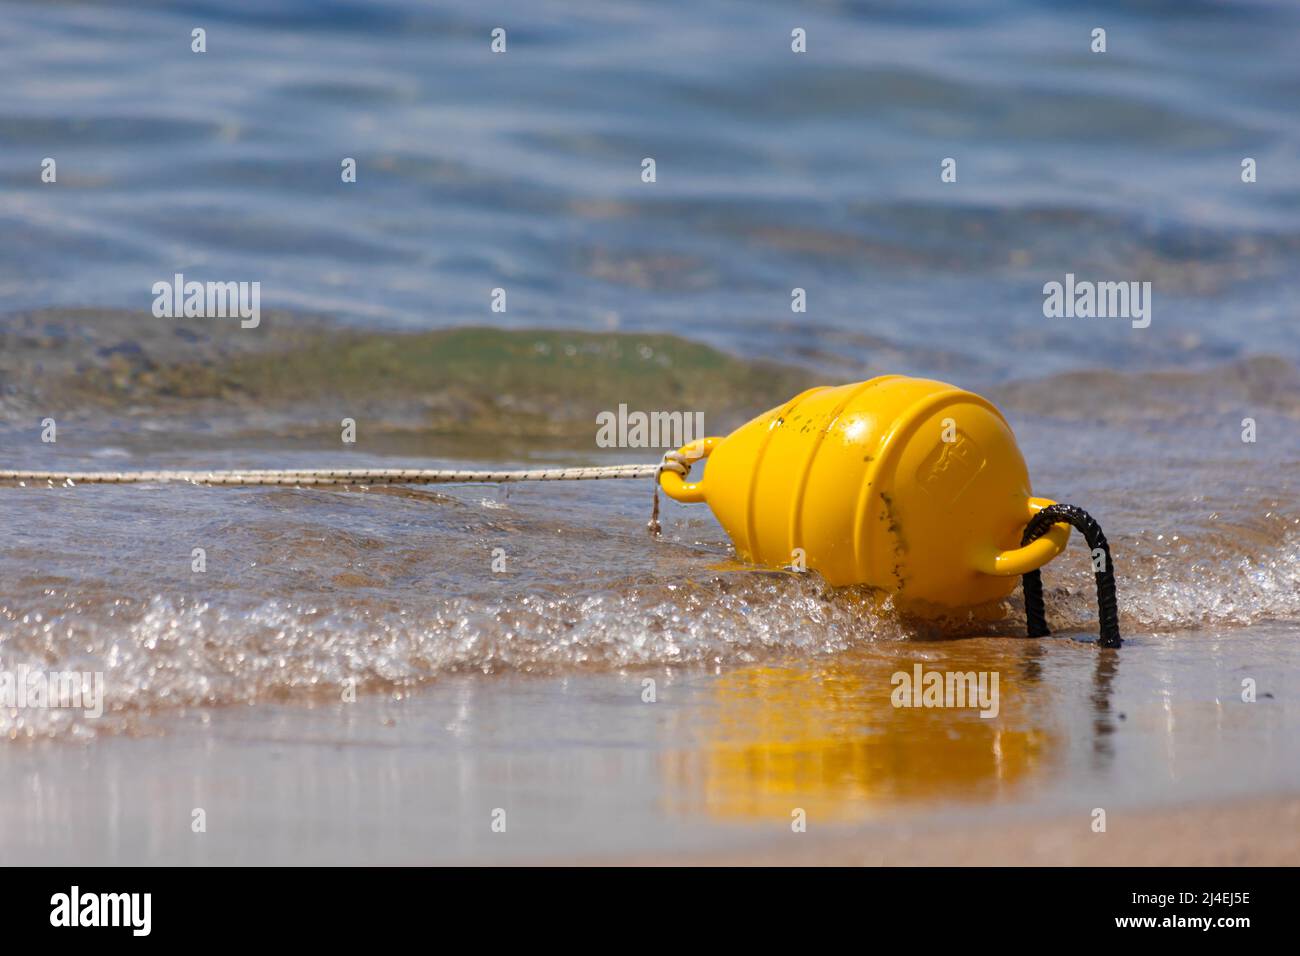 Safety yellow sea buoys floating on the beach Stock Photo